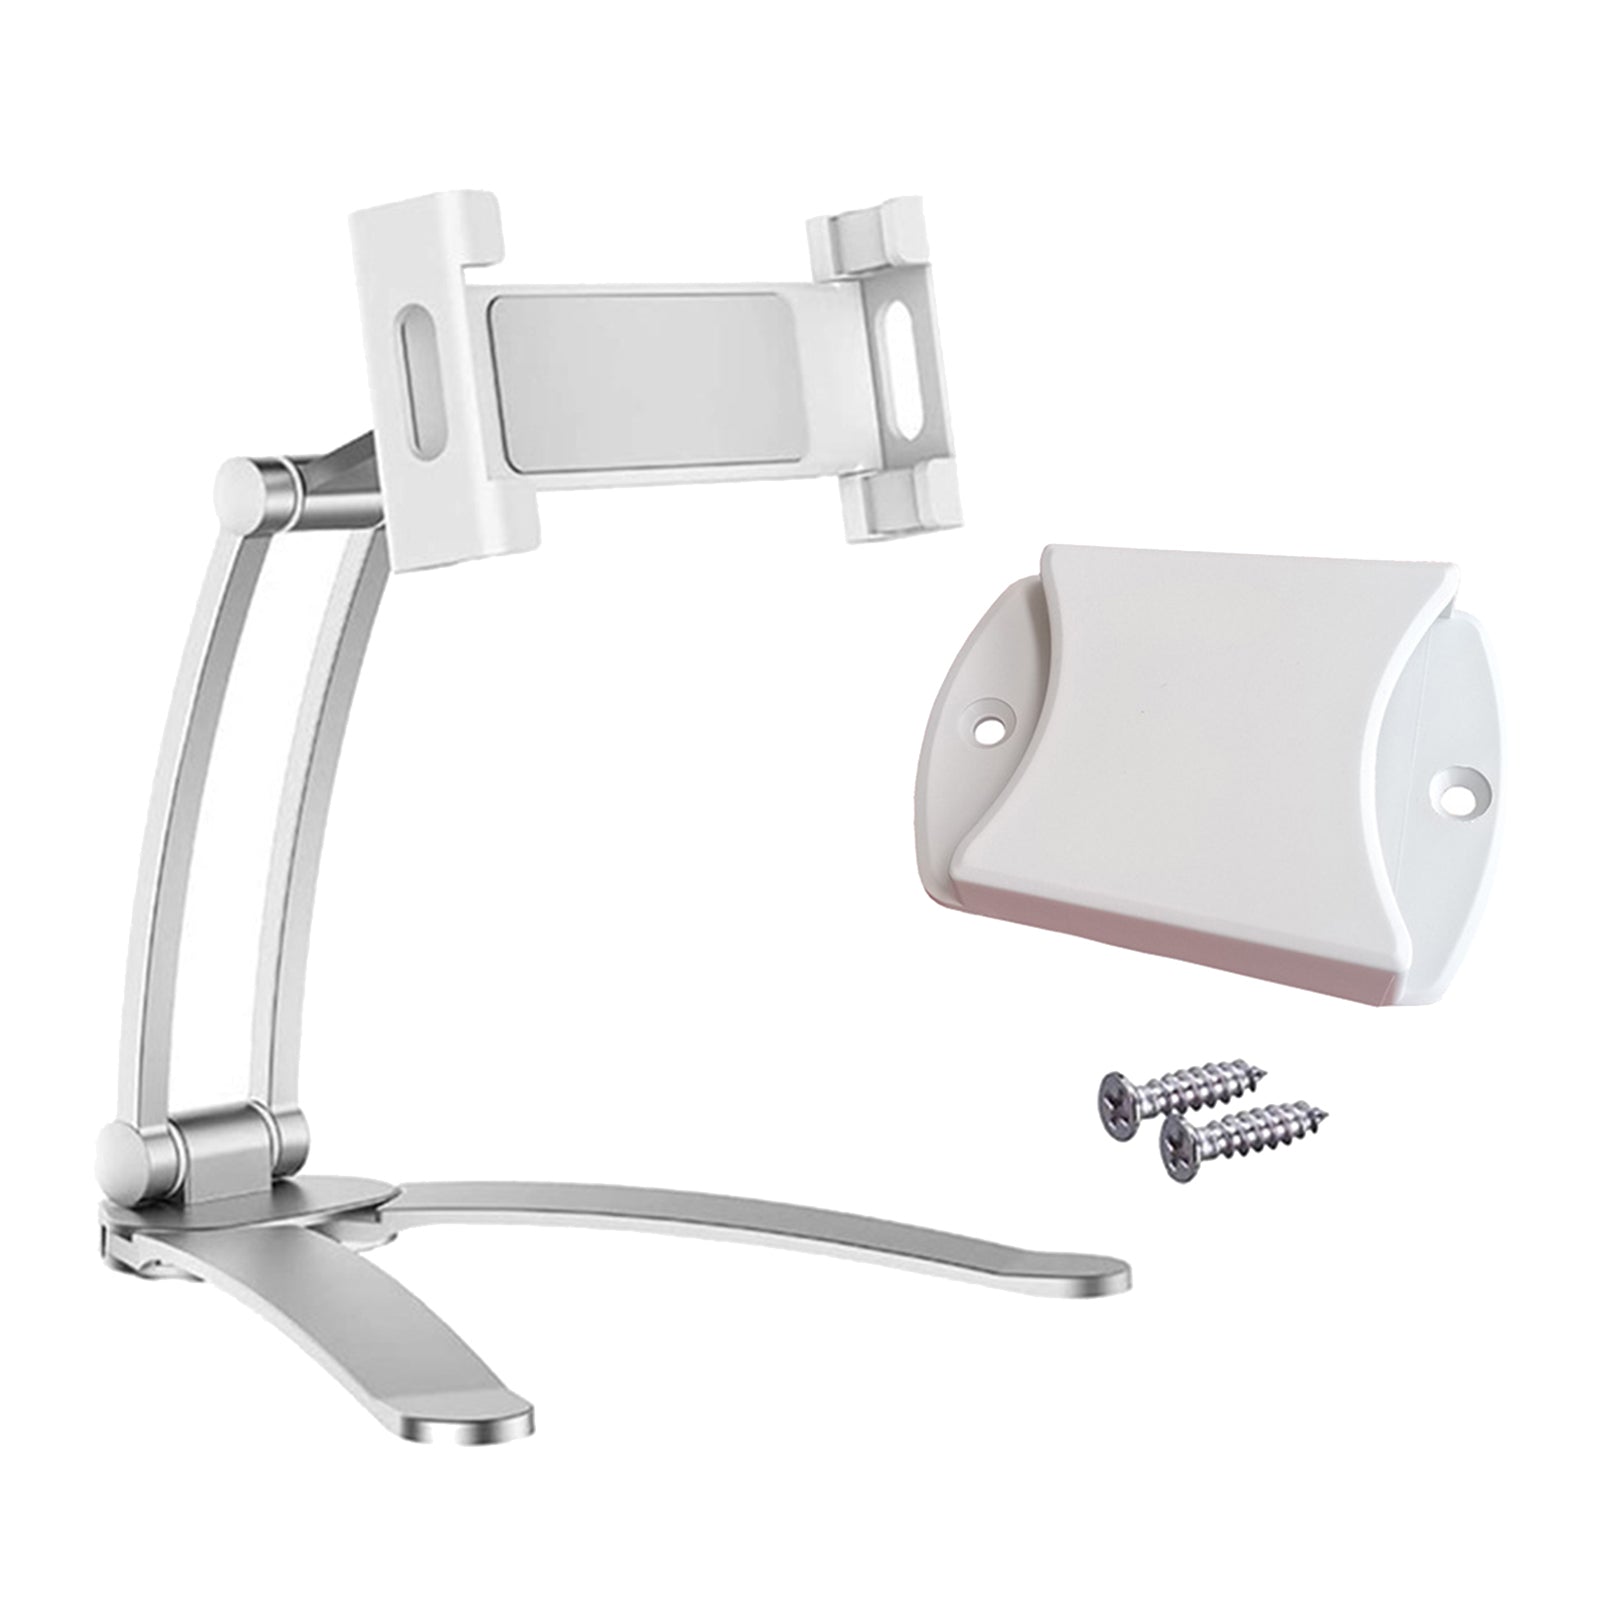 Desktop Cell Phone Tablet Holder Stand Wall Mount Counter Holder Silver L